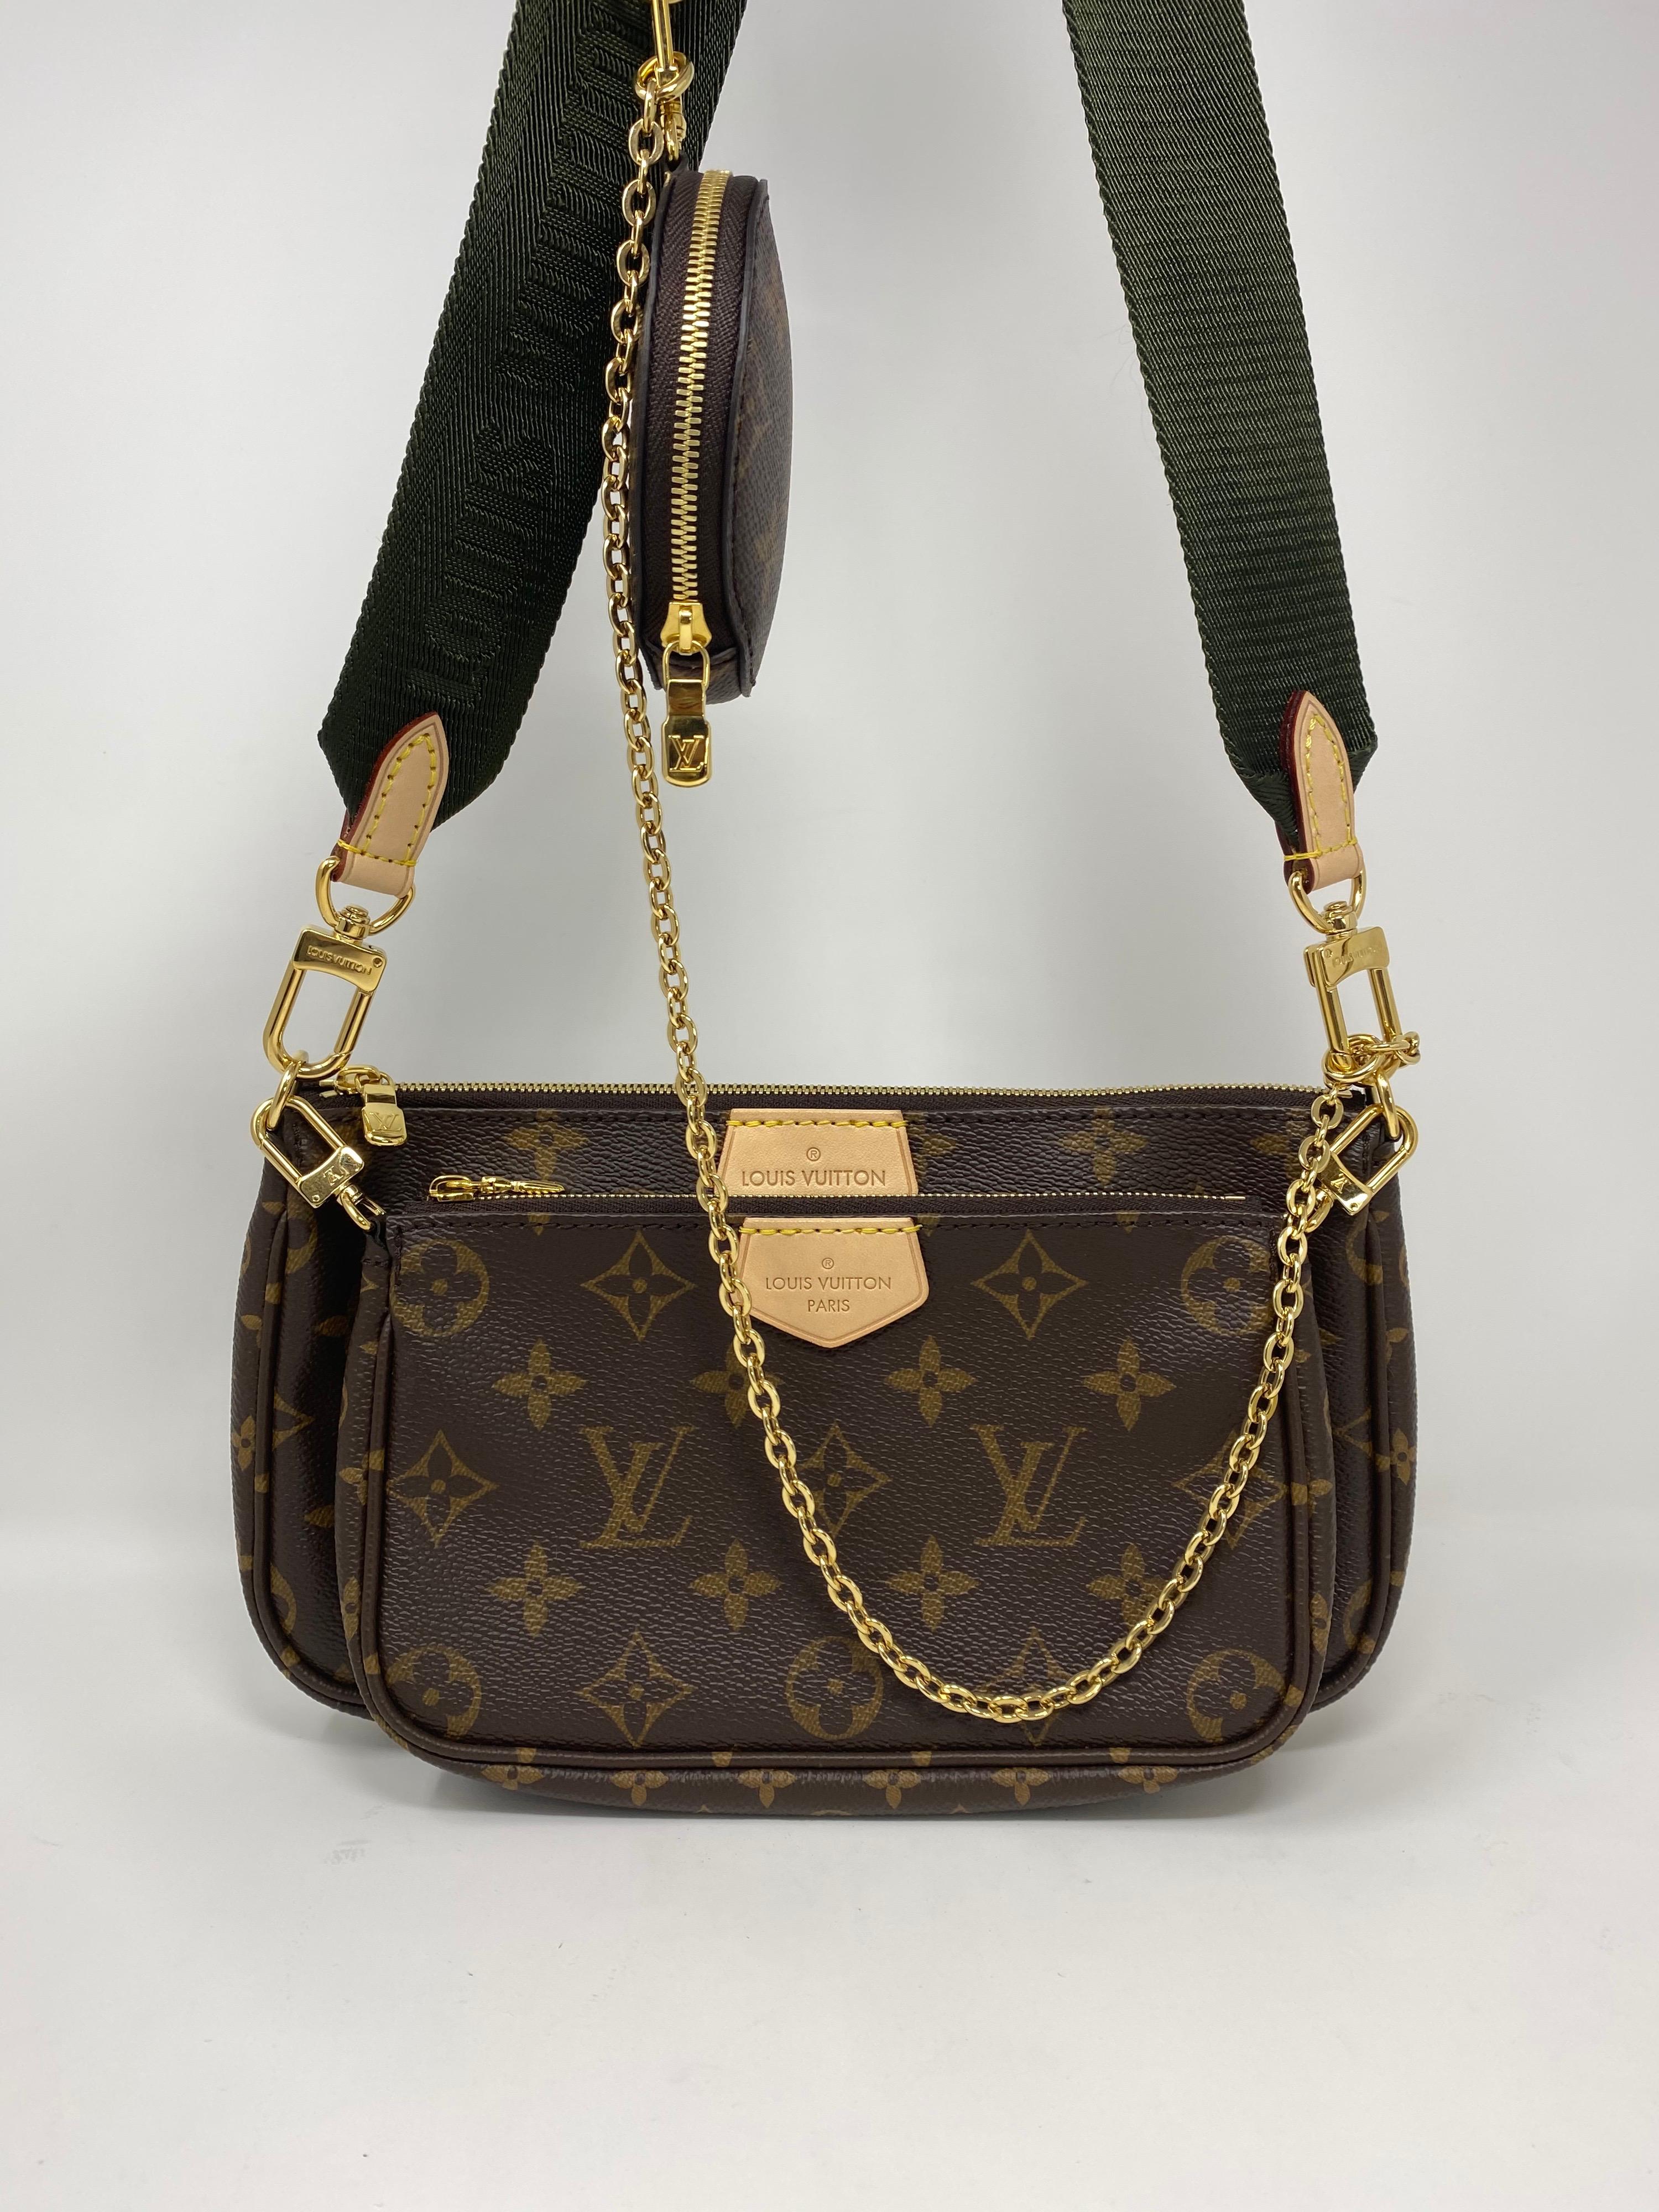 Louis Vuitton Multi Pochette with khaki strap. Brand new. Limited and sold out at LV. The most wanted accessory of the moment. Can be worn multiple ways. Versatile and functional. Guaranteed authentic. 